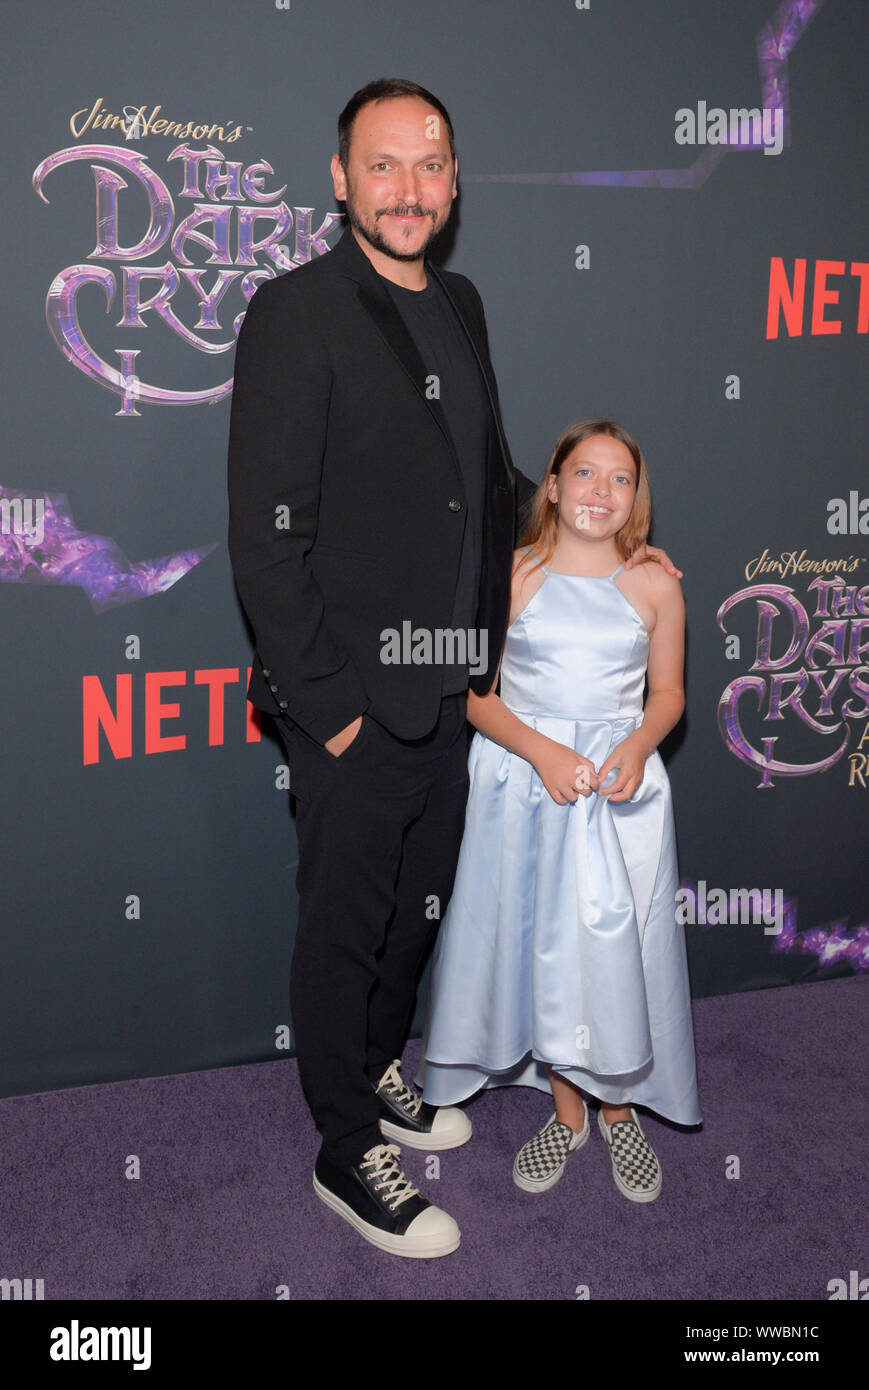 New York, NY - August 27, 2019: Louis Leterrier and Mila Leterrier attend  The Dark Crystal: Age of Resistance premiere at Museum of the Moving Image  Stock Photo - Alamy